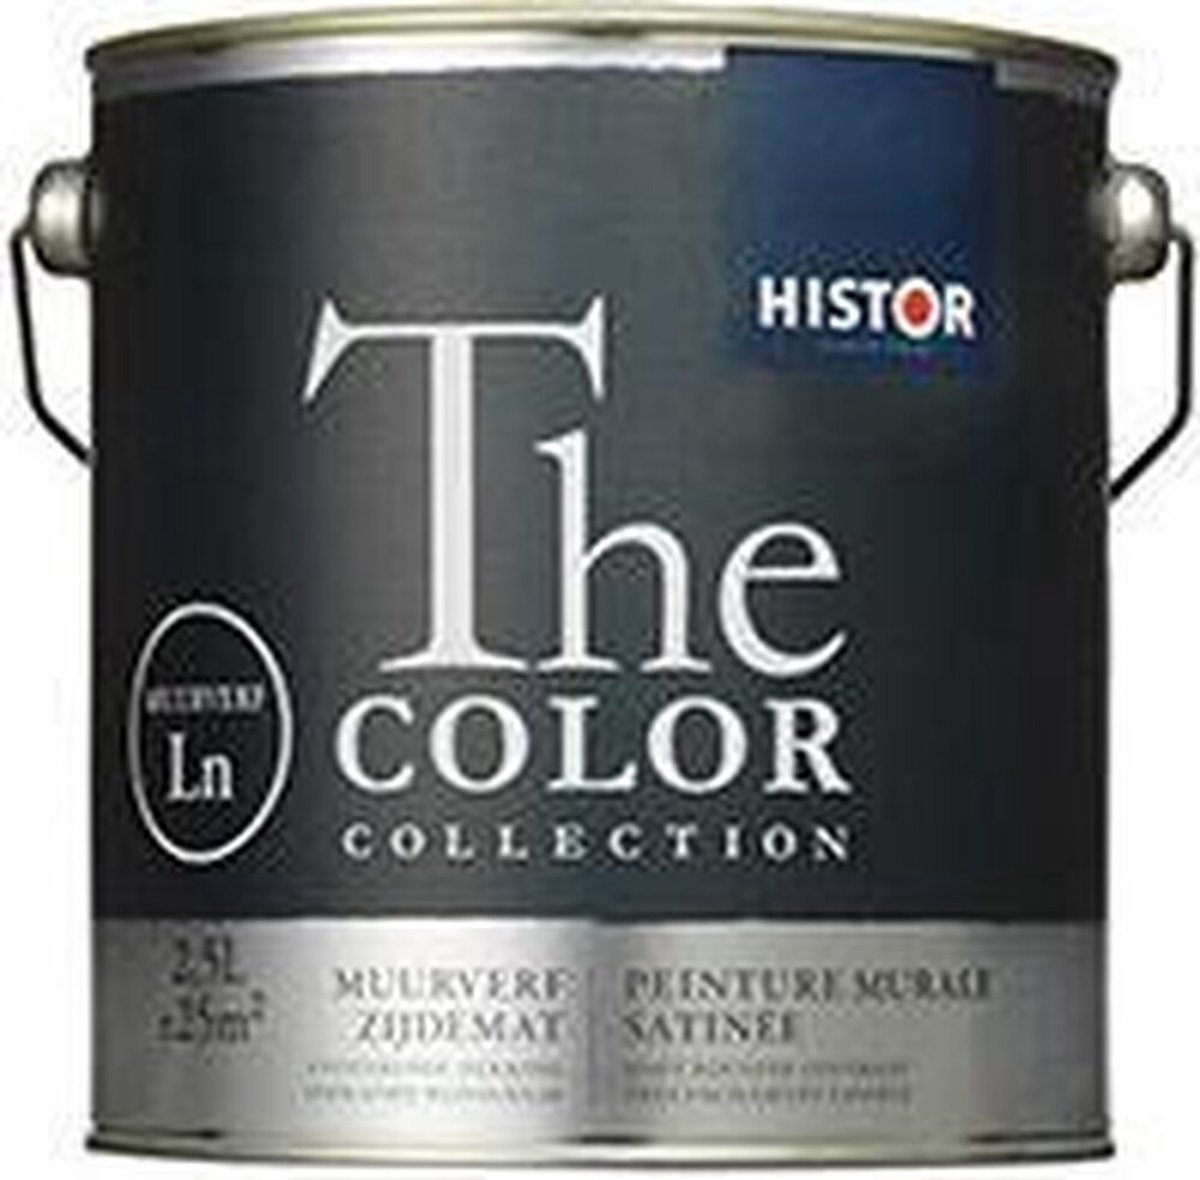 The Color Collection Muurverf Zijdemat - 25 Liter